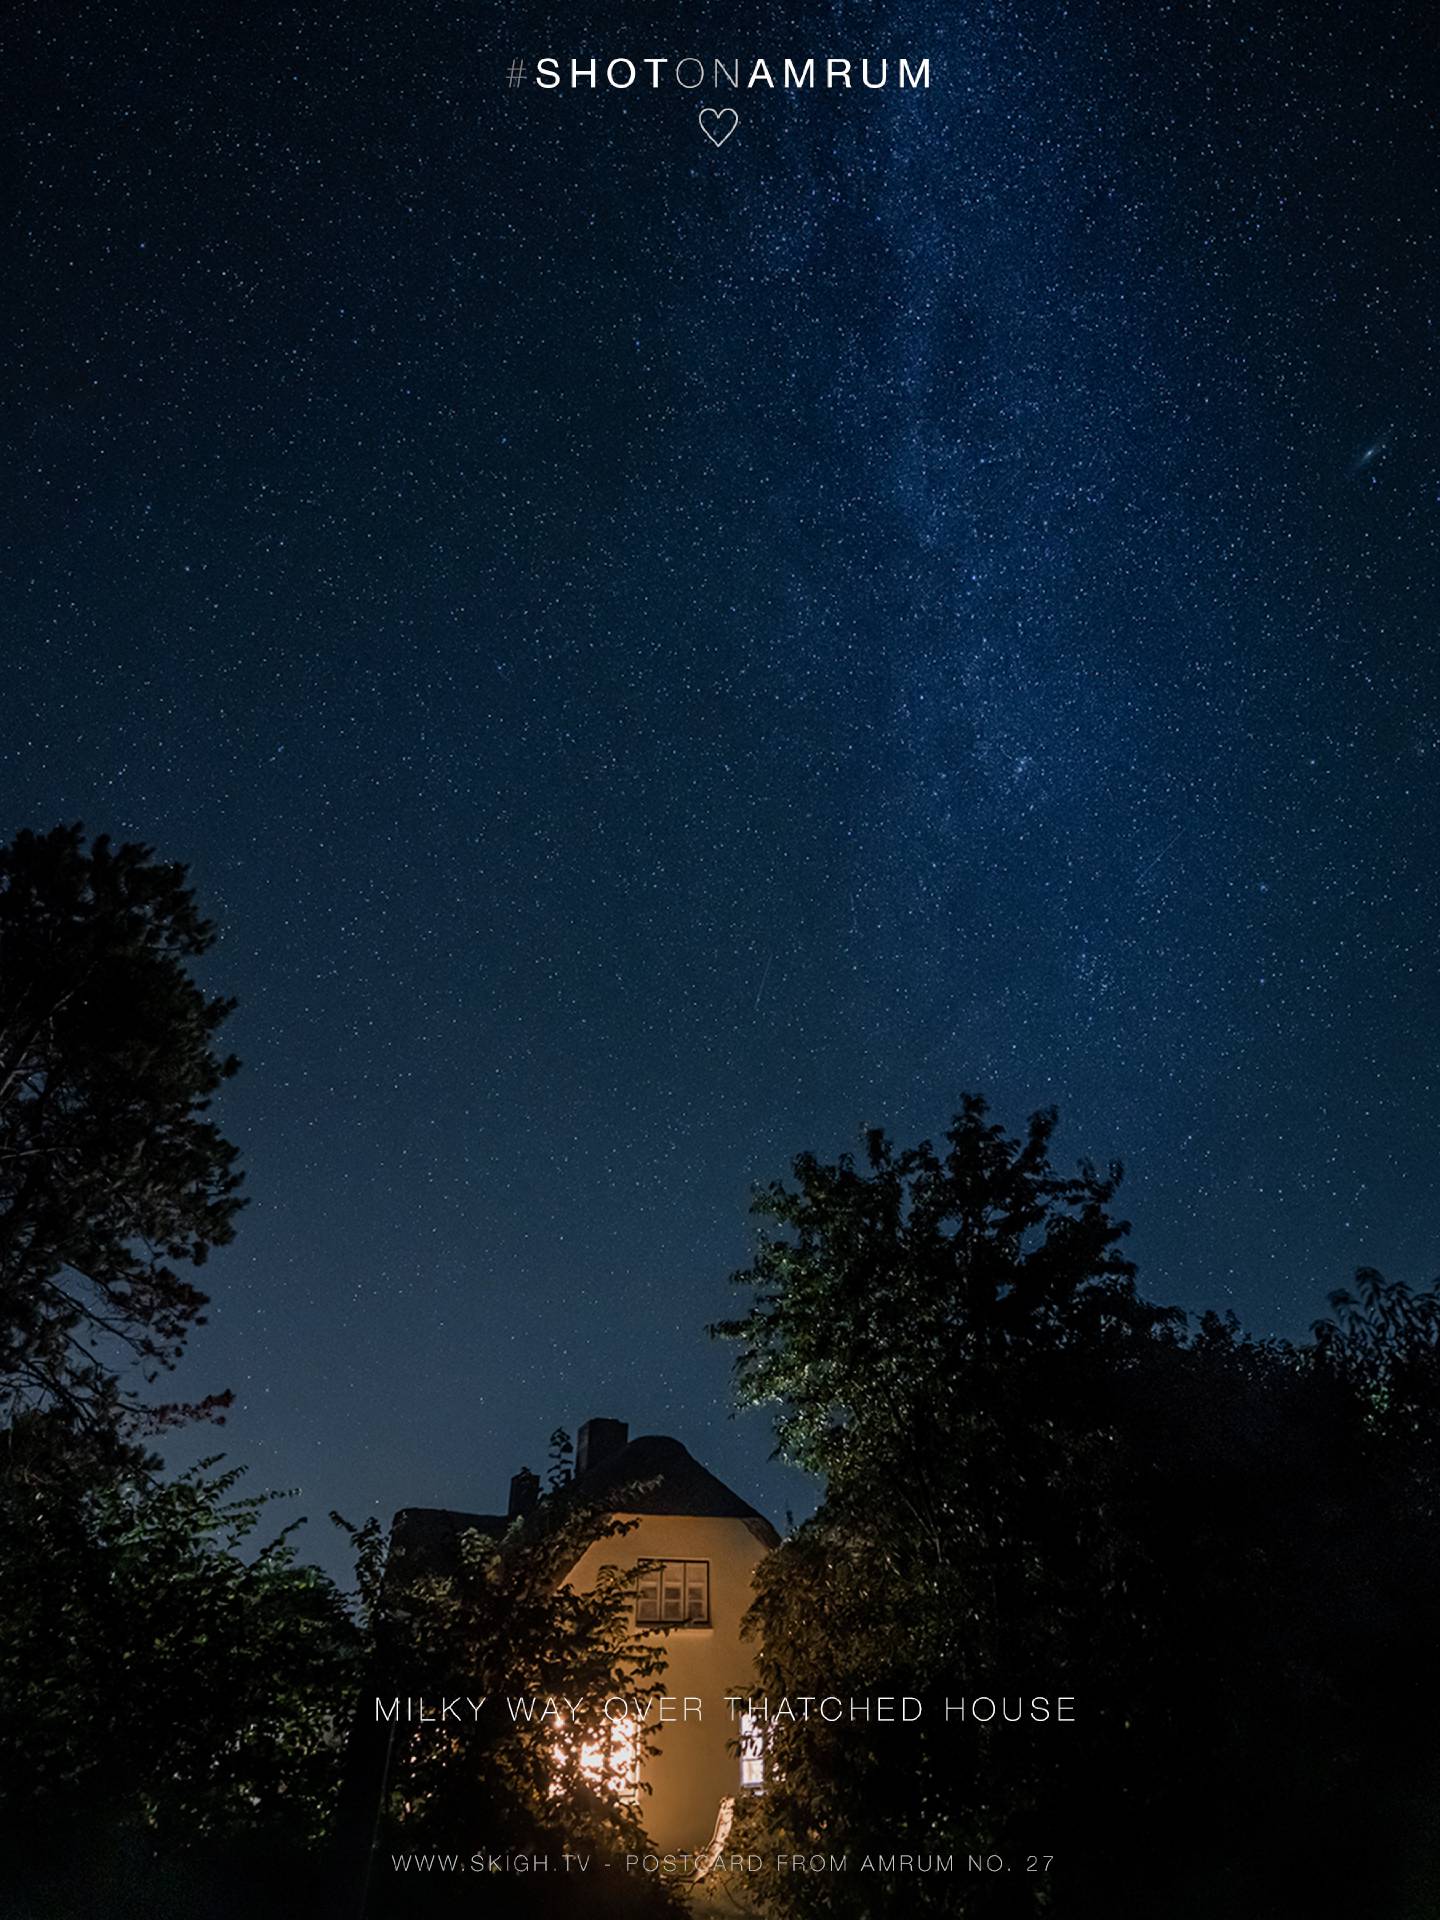 Milky Way over thatched house